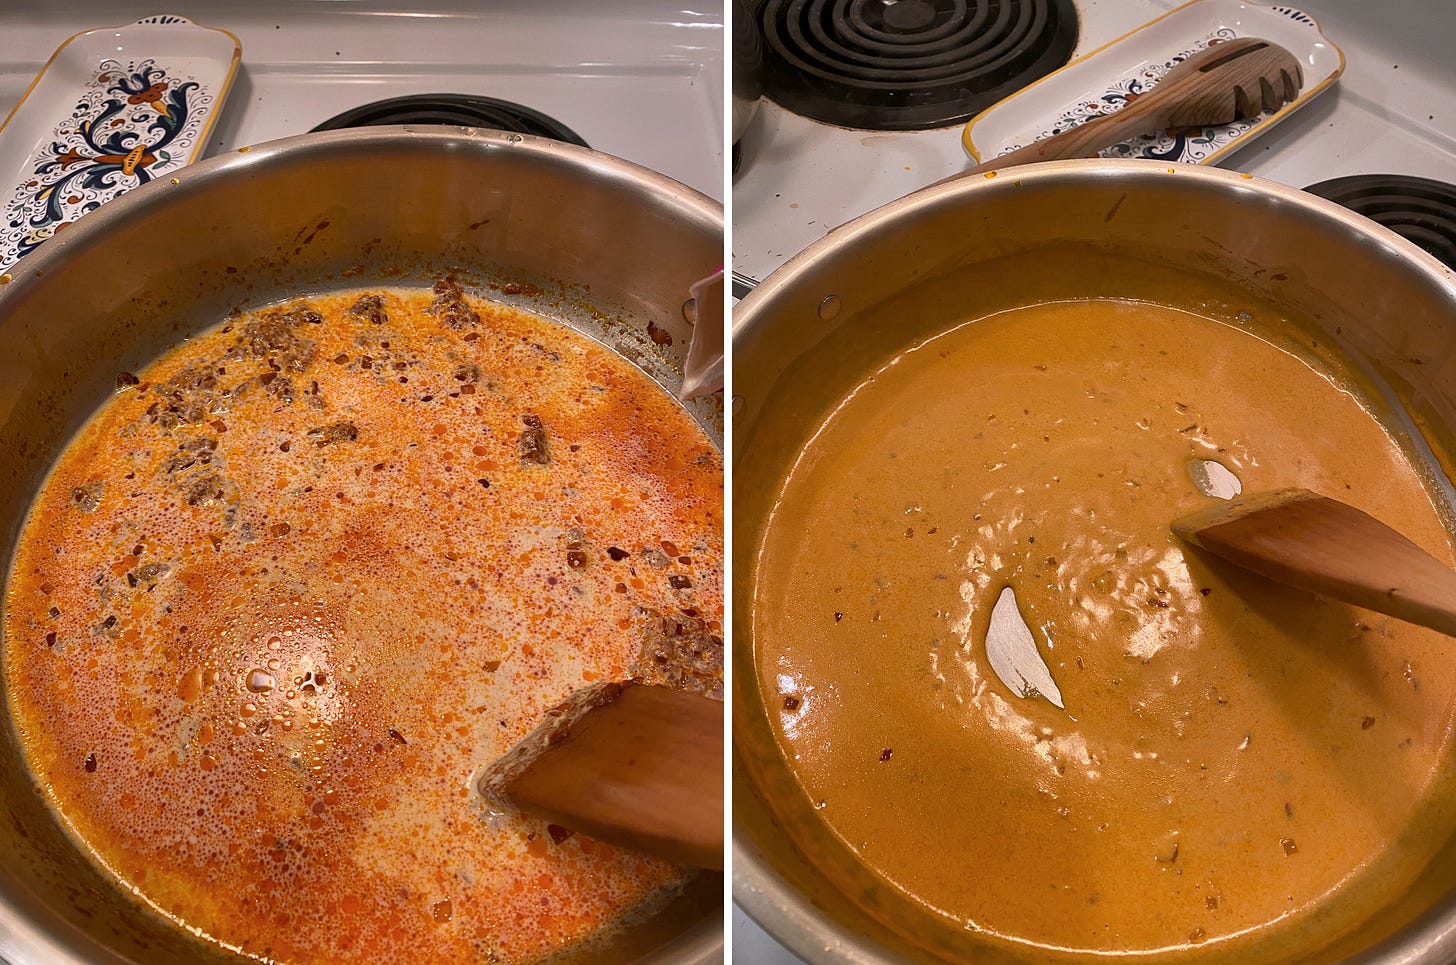 Left image: a wide pan with the beginnings of the vodka sauce, spotted red and white and slightly oily-looking as it begins to coalesce. Right image: the sauce once it has come together, a light orange-ish colour. A flat wooden spoon stirs the sauce in both images.